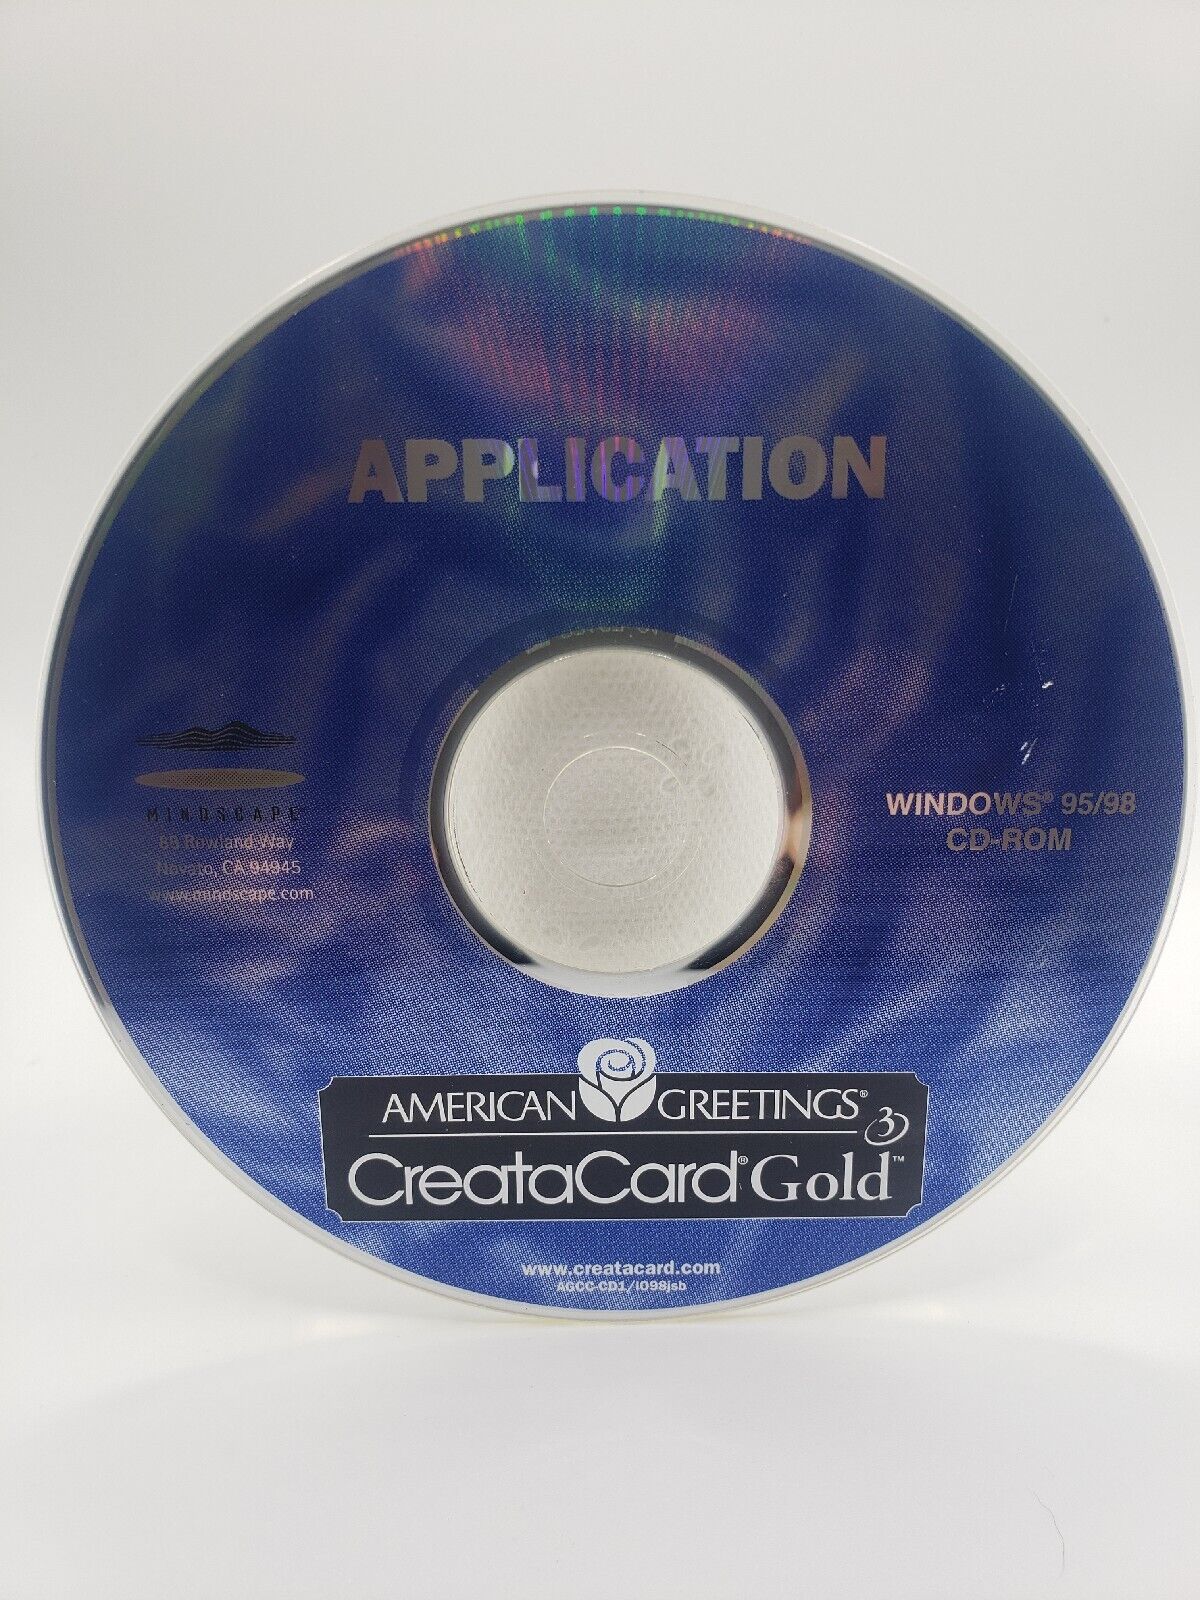 American Greetings Creatacard Gold Version 3 [CD-ROM] Windows 95/98 - Disc Only